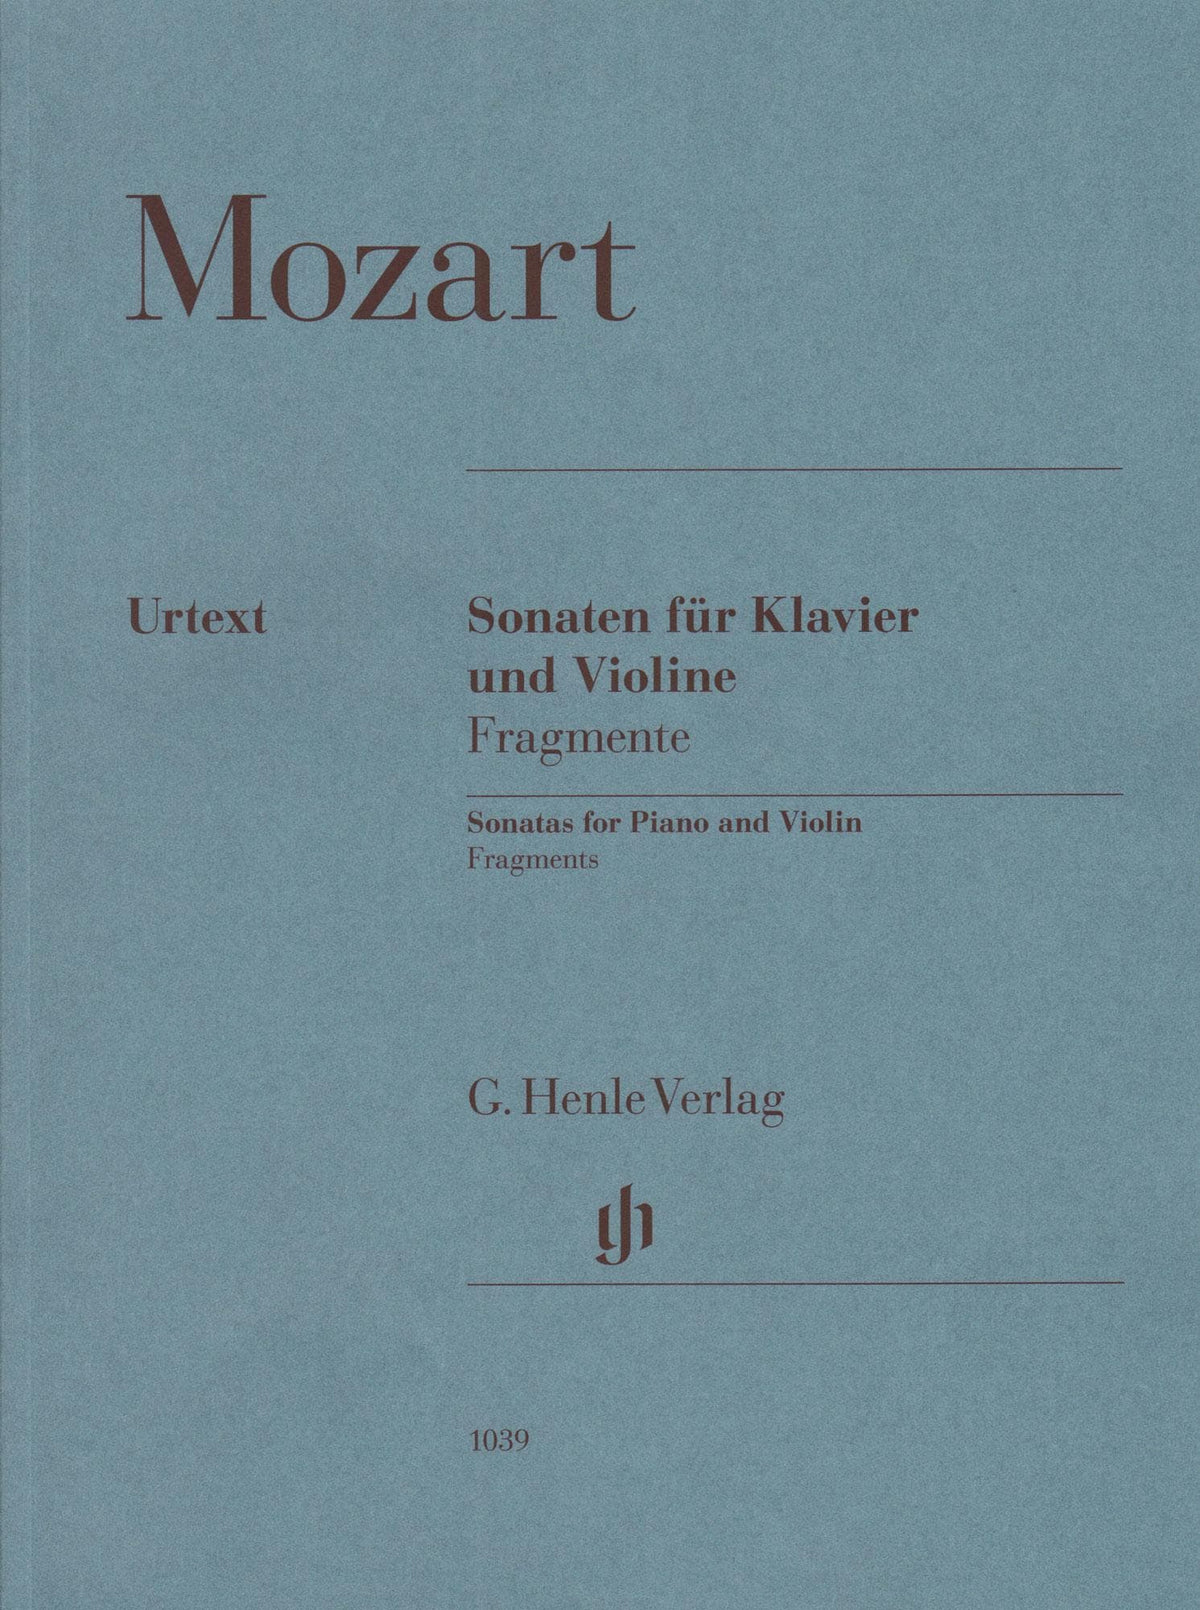 Mozart, W.A. - Sonatas (Fragments) - for Violin and Piano - Edited by Seiffert - Additions by Robert D. Levin - G Henle URTEXT